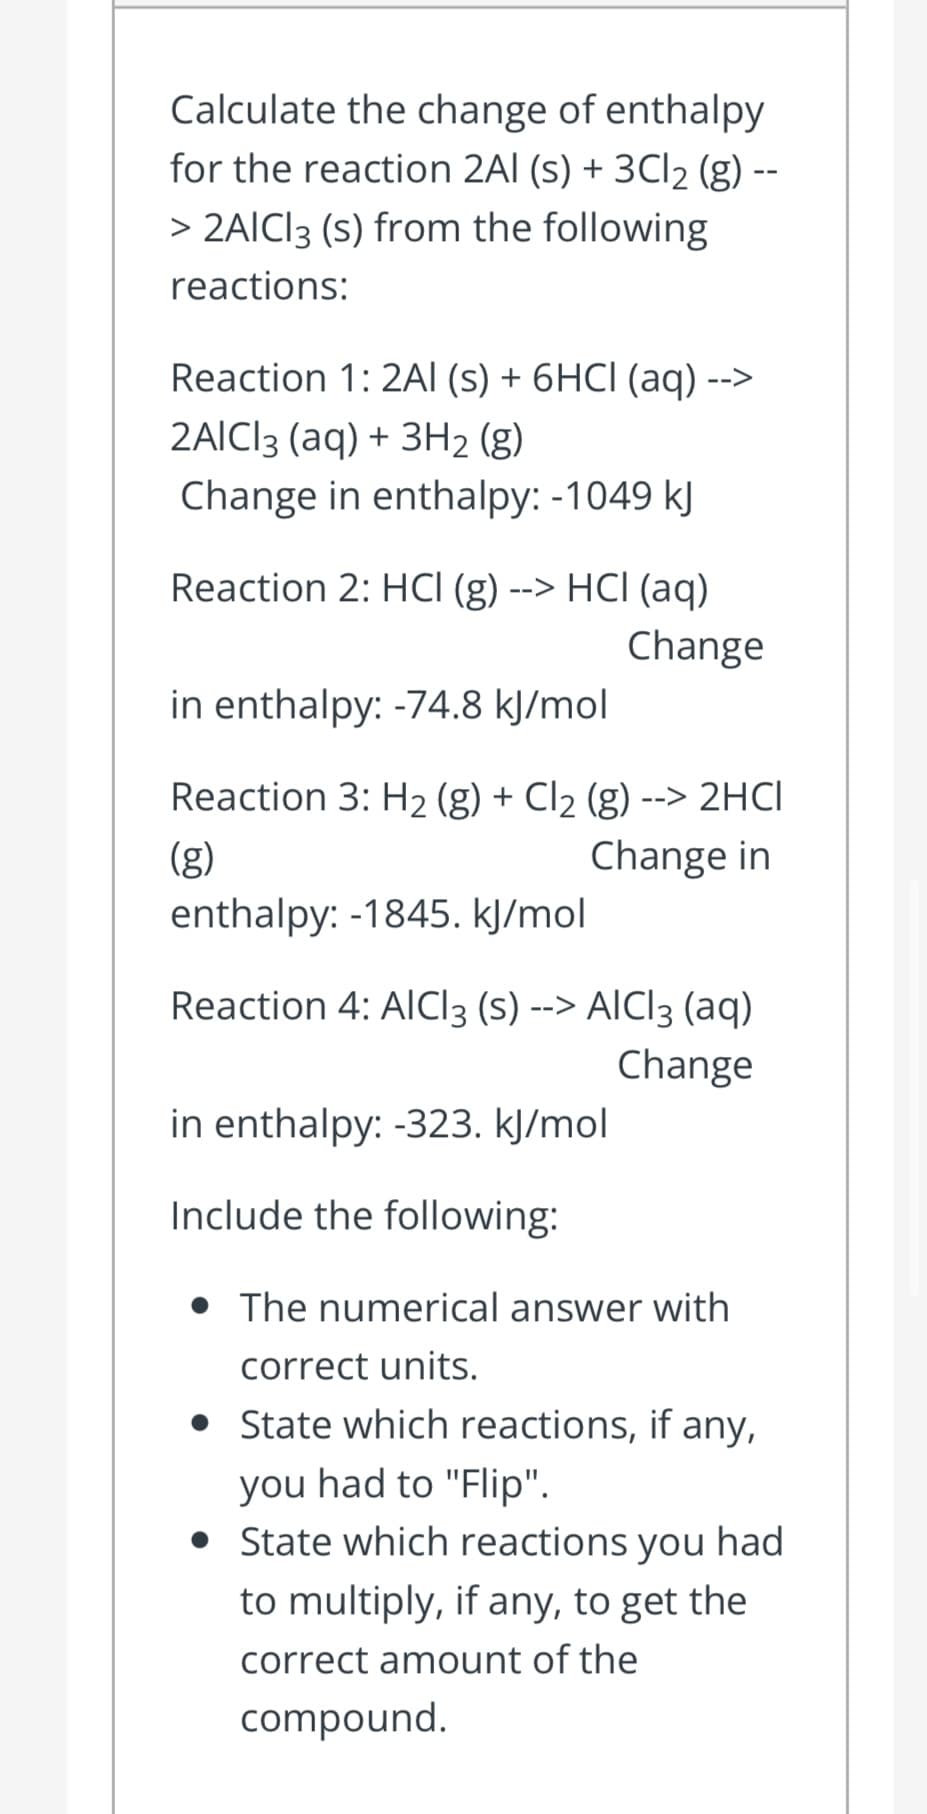 Calculate the change of enthalpy
for the reaction 2Al (s) + 3CI2 (g) --
> 2AICI3 (s) from the following
reactions:
Reaction 1: 2AI (s) + 6HCI (aq) -->
2AICI3 (aq) + 3H2 (g)
Change in enthalpy: -1049 kJ
Reaction 2: HCI (g) --> HCI (aq)
Change
in enthalpy: -74.8 kJ/mol
Reaction 3: H2 (g) + Cl2 (g) --> 2HCI
(g)
Change in
enthalpy: -1845. kJ/mol
Reaction 4: AlCI3 (s) --> AICI3 (aq)
Change
in enthalpy: -323. kJ/mol
Include the following:
• The numerical answer with
correct units.
• State which reactions, if any,
you had to "Flip".
• State which reactions you had
to multiply, if any, to get the
correct amount of the
compound.
